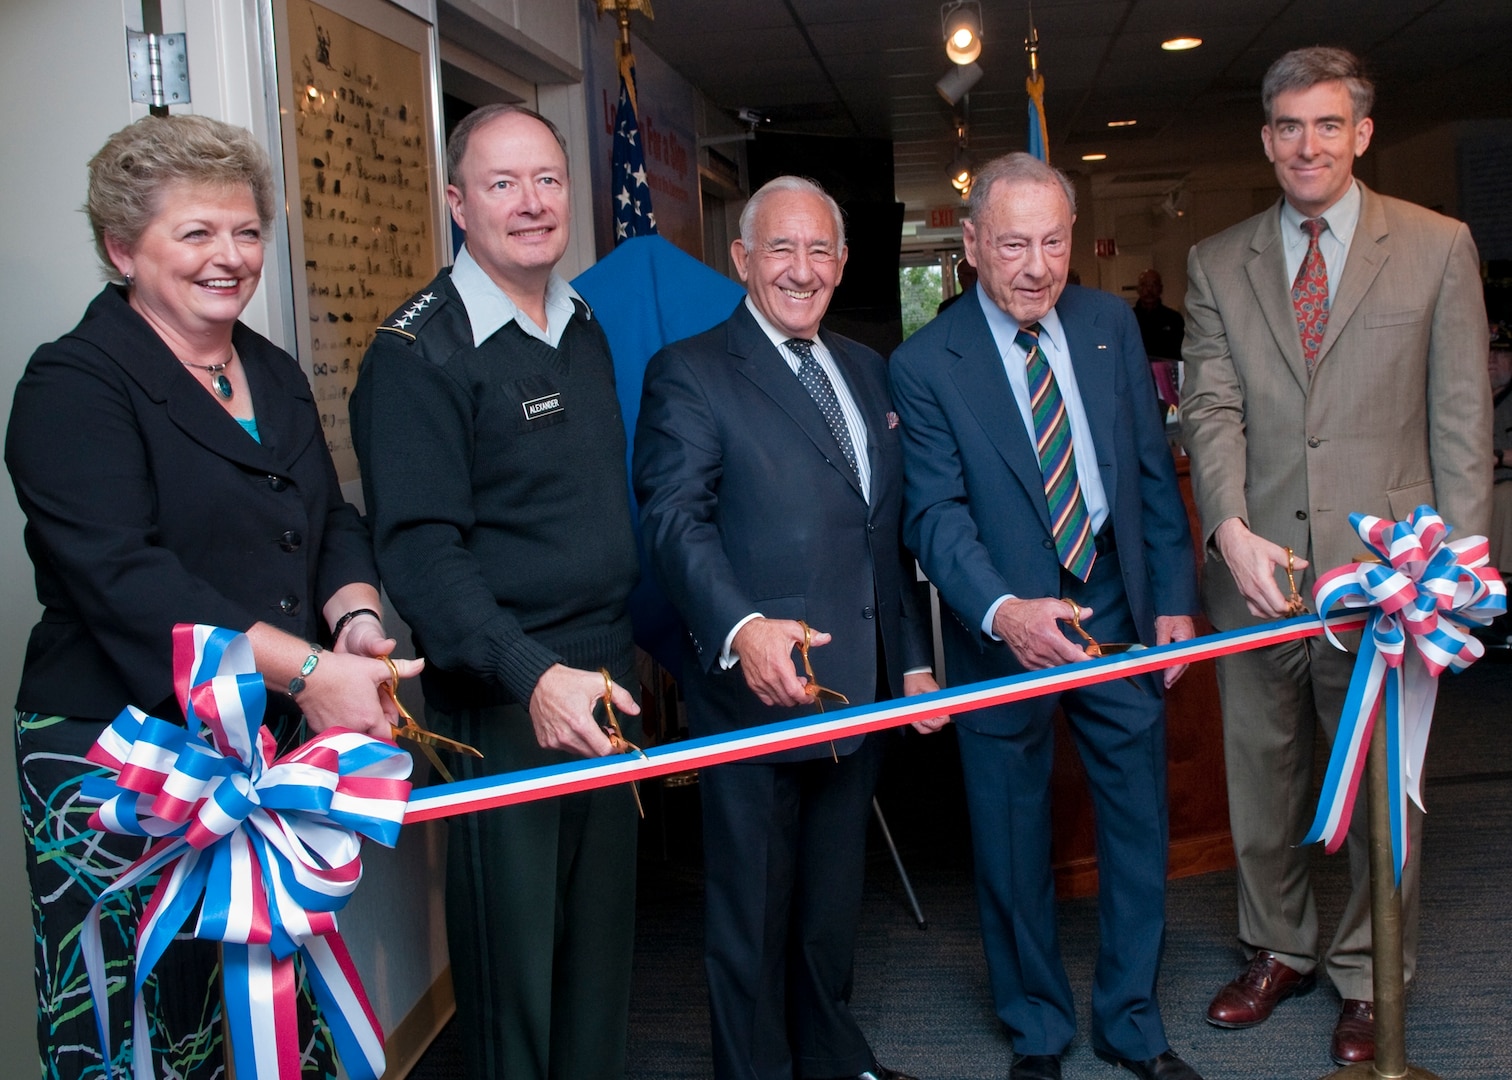 Photo of the Ribbon Cutting Ceremony (from left to right Judith Emmel, Associate Director for Strategic Communications, General Keith B. Alexander, USA, Commander, U.S. Cyber Command/Director, NSA/Chief, CSS, Dr. David Kahn, and Mr. John C. Inglis, Deputy Director, NSA)